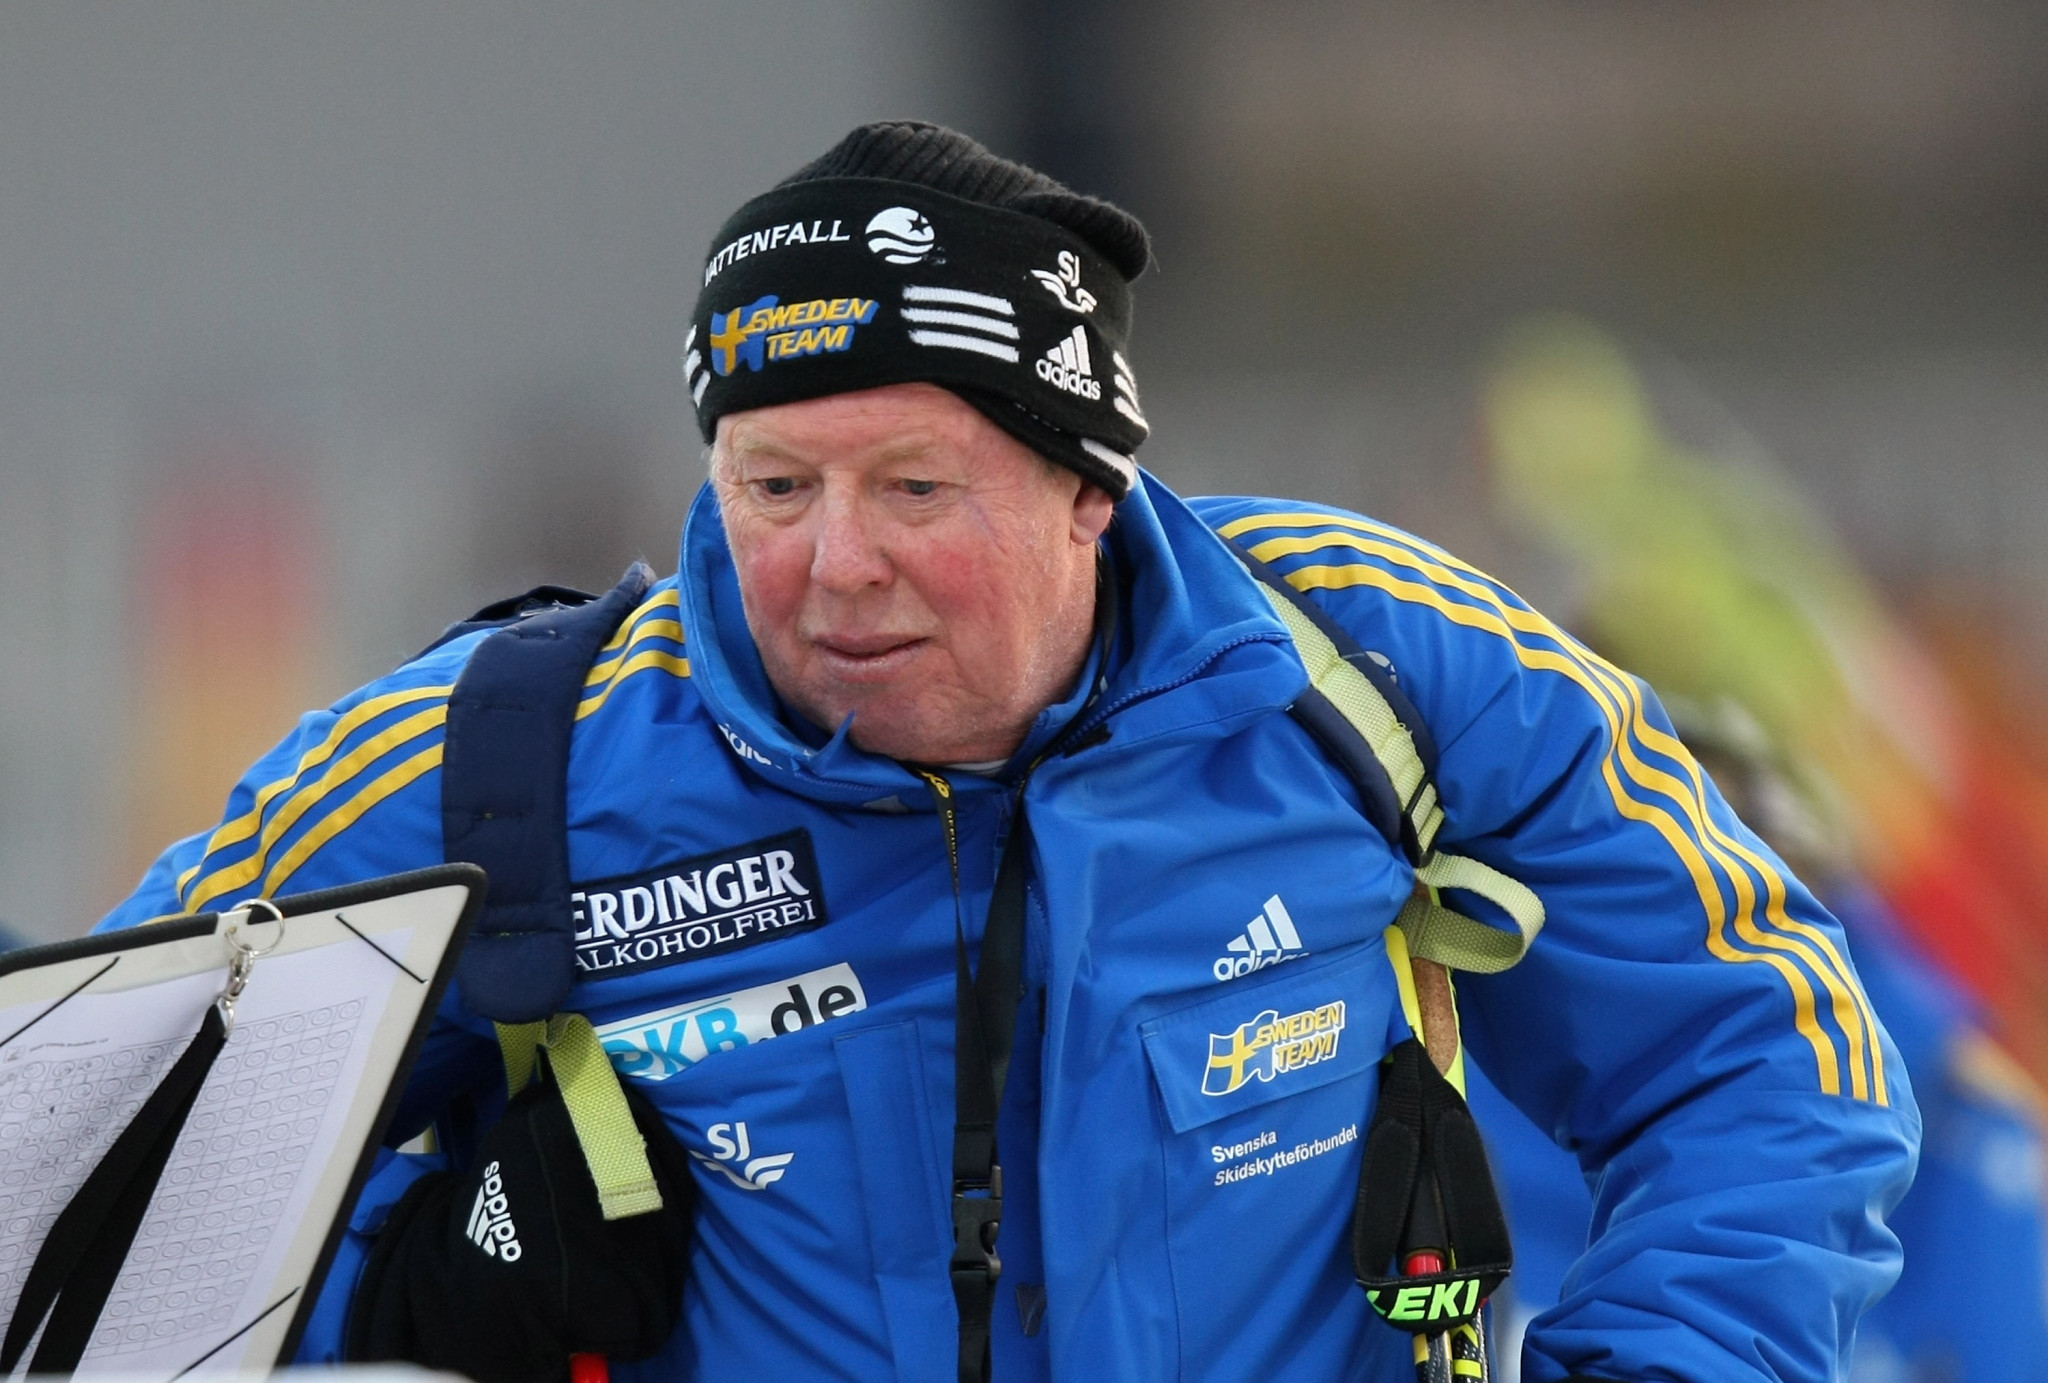 Swedish biathlon coach Wolfgang Pichler has been denied accreditation for Pyeongchang 2018 ©Getty Images